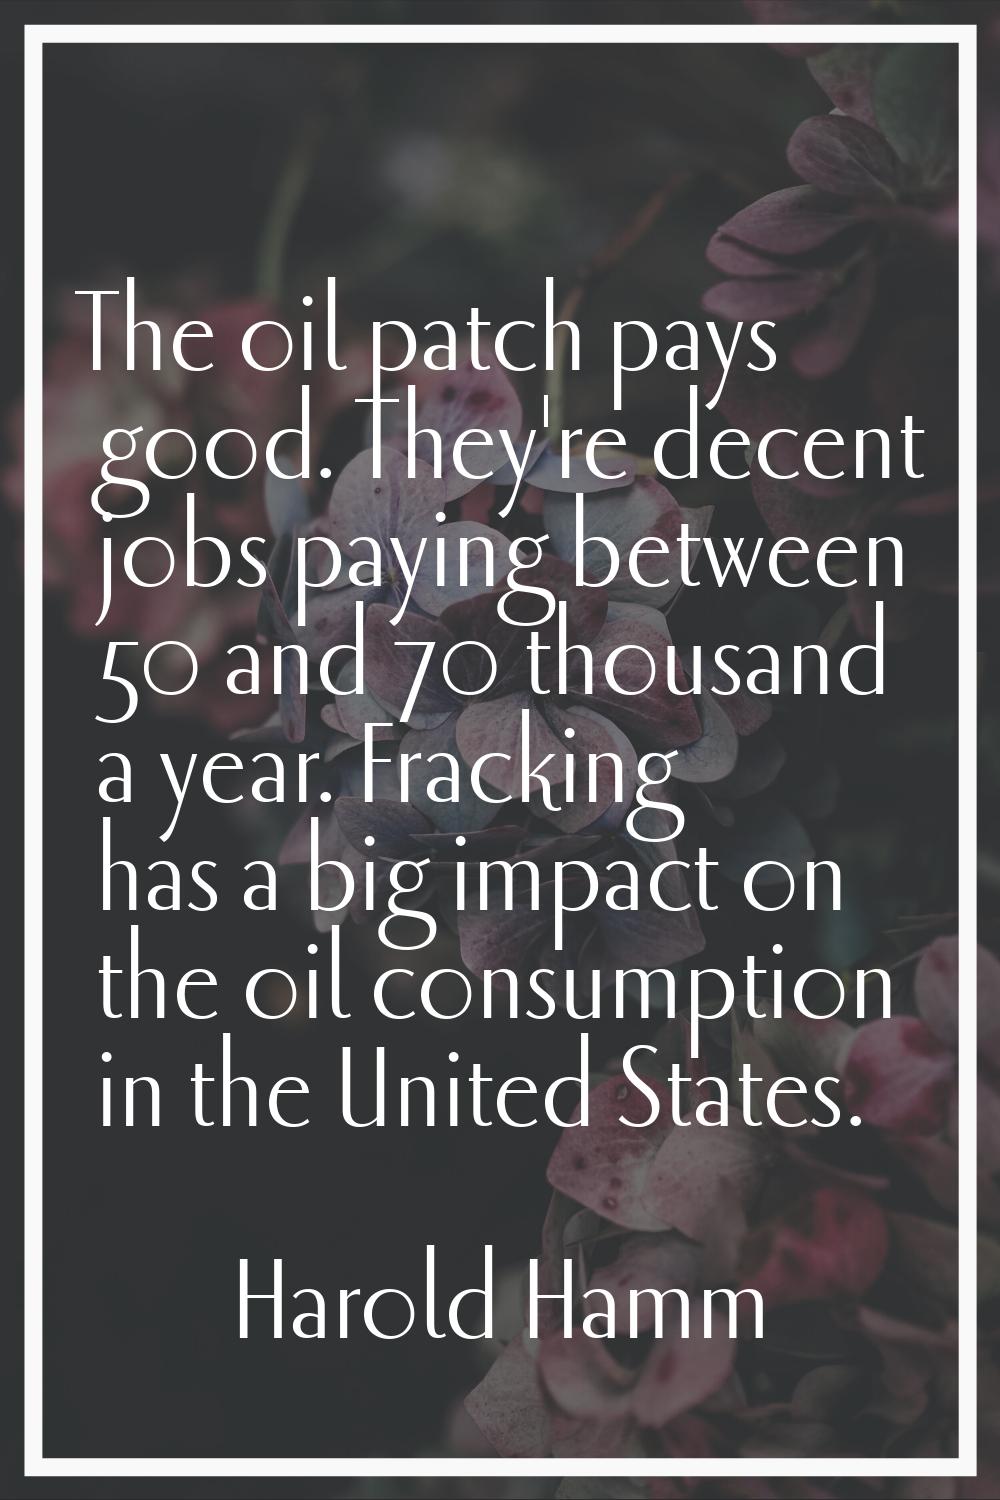 The oil patch pays good. They're decent jobs paying between 50 and 70 thousand a year. Fracking has